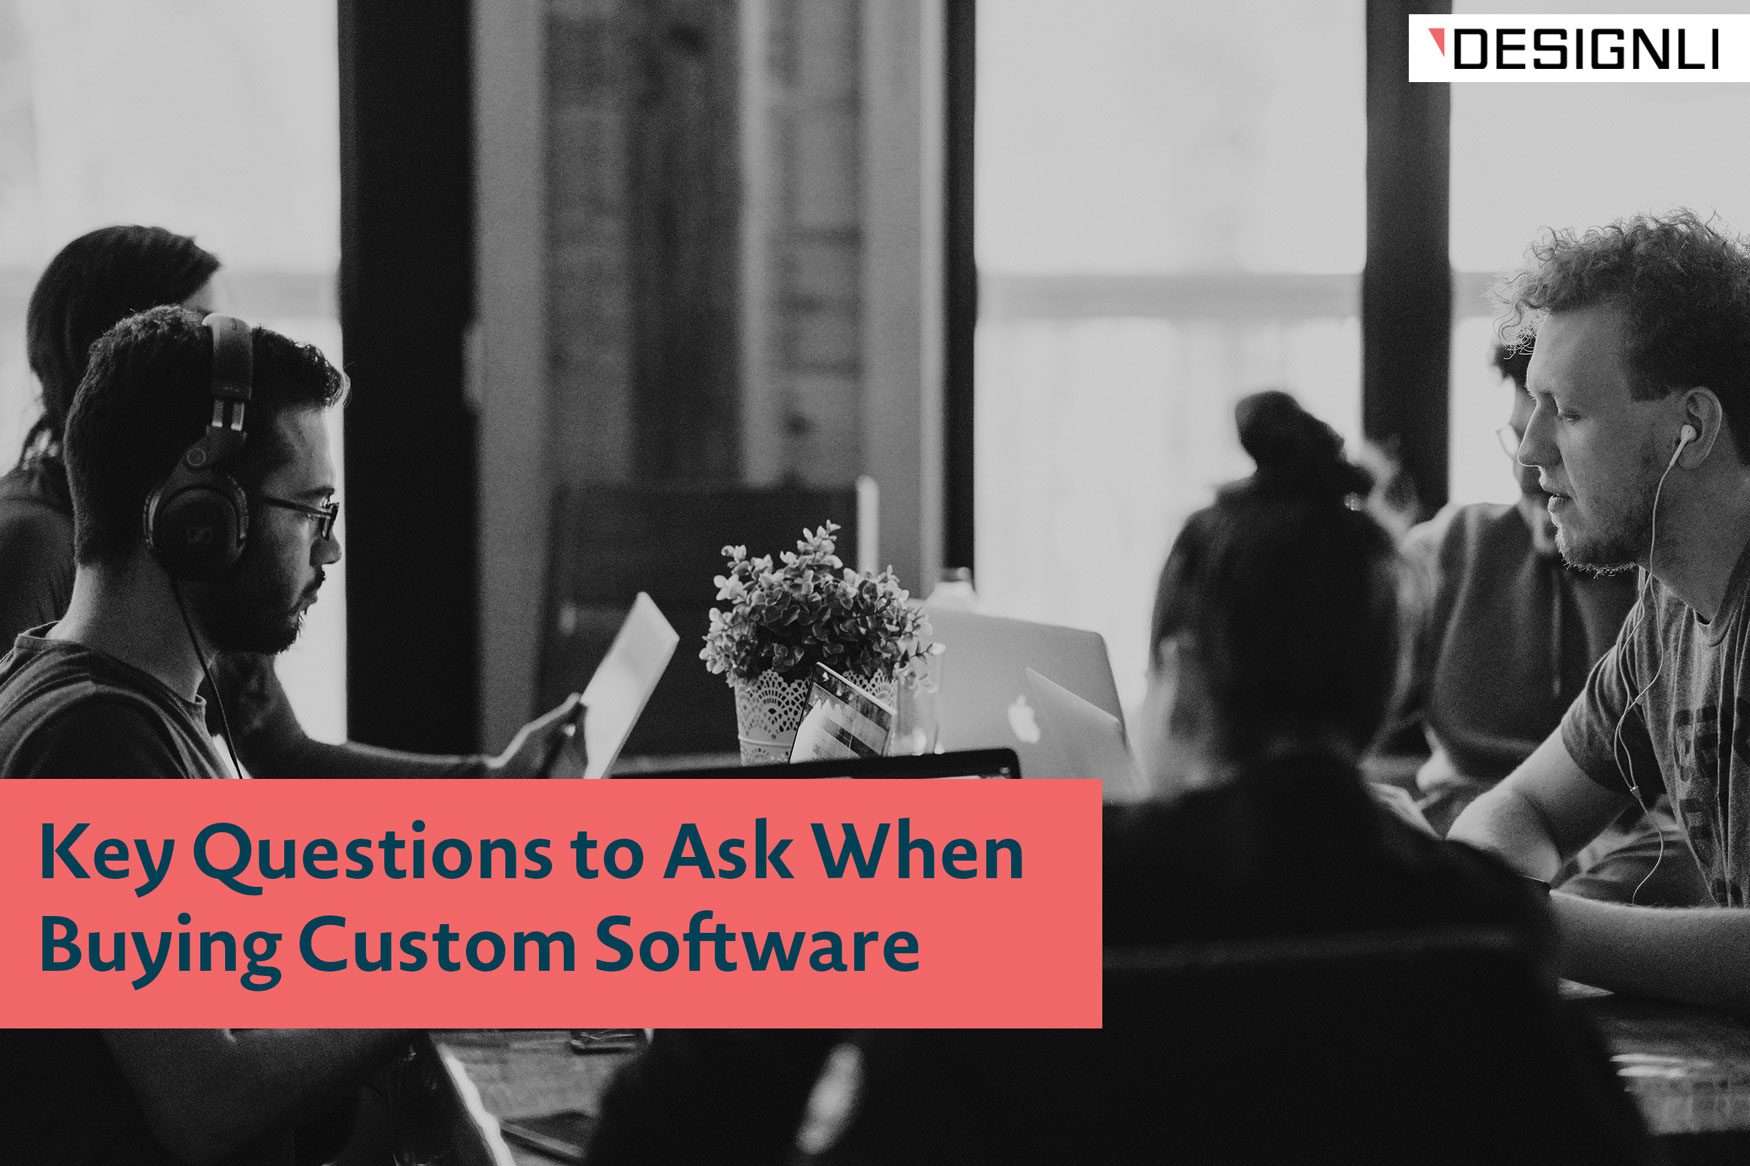 Key Questions to Ask When Buying Custom Software